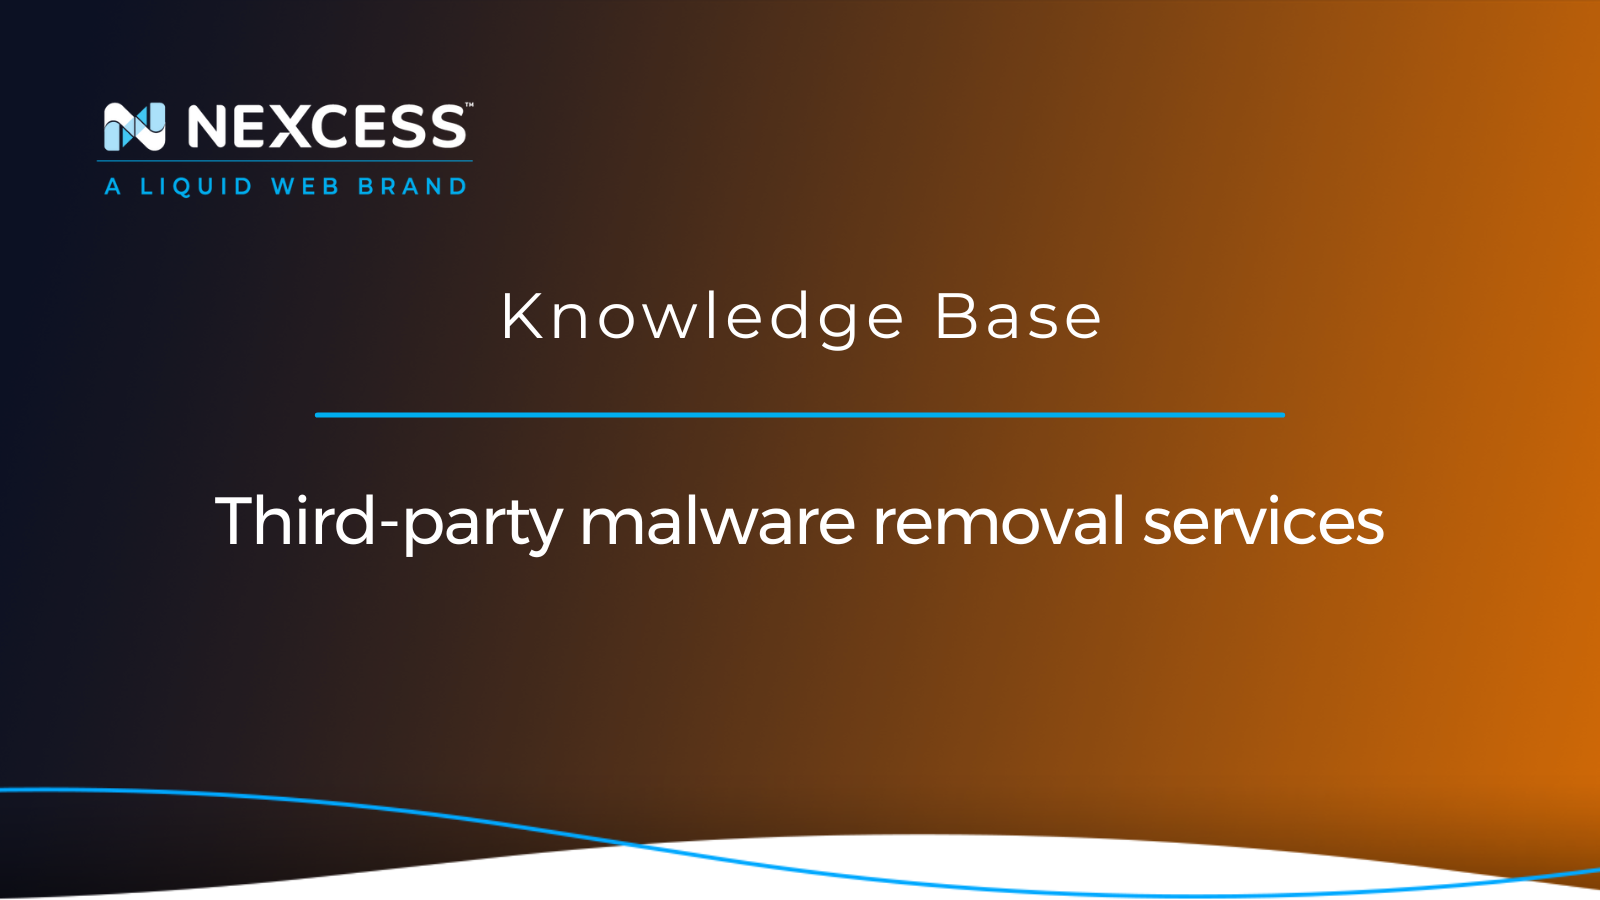 Third-party malware removal services